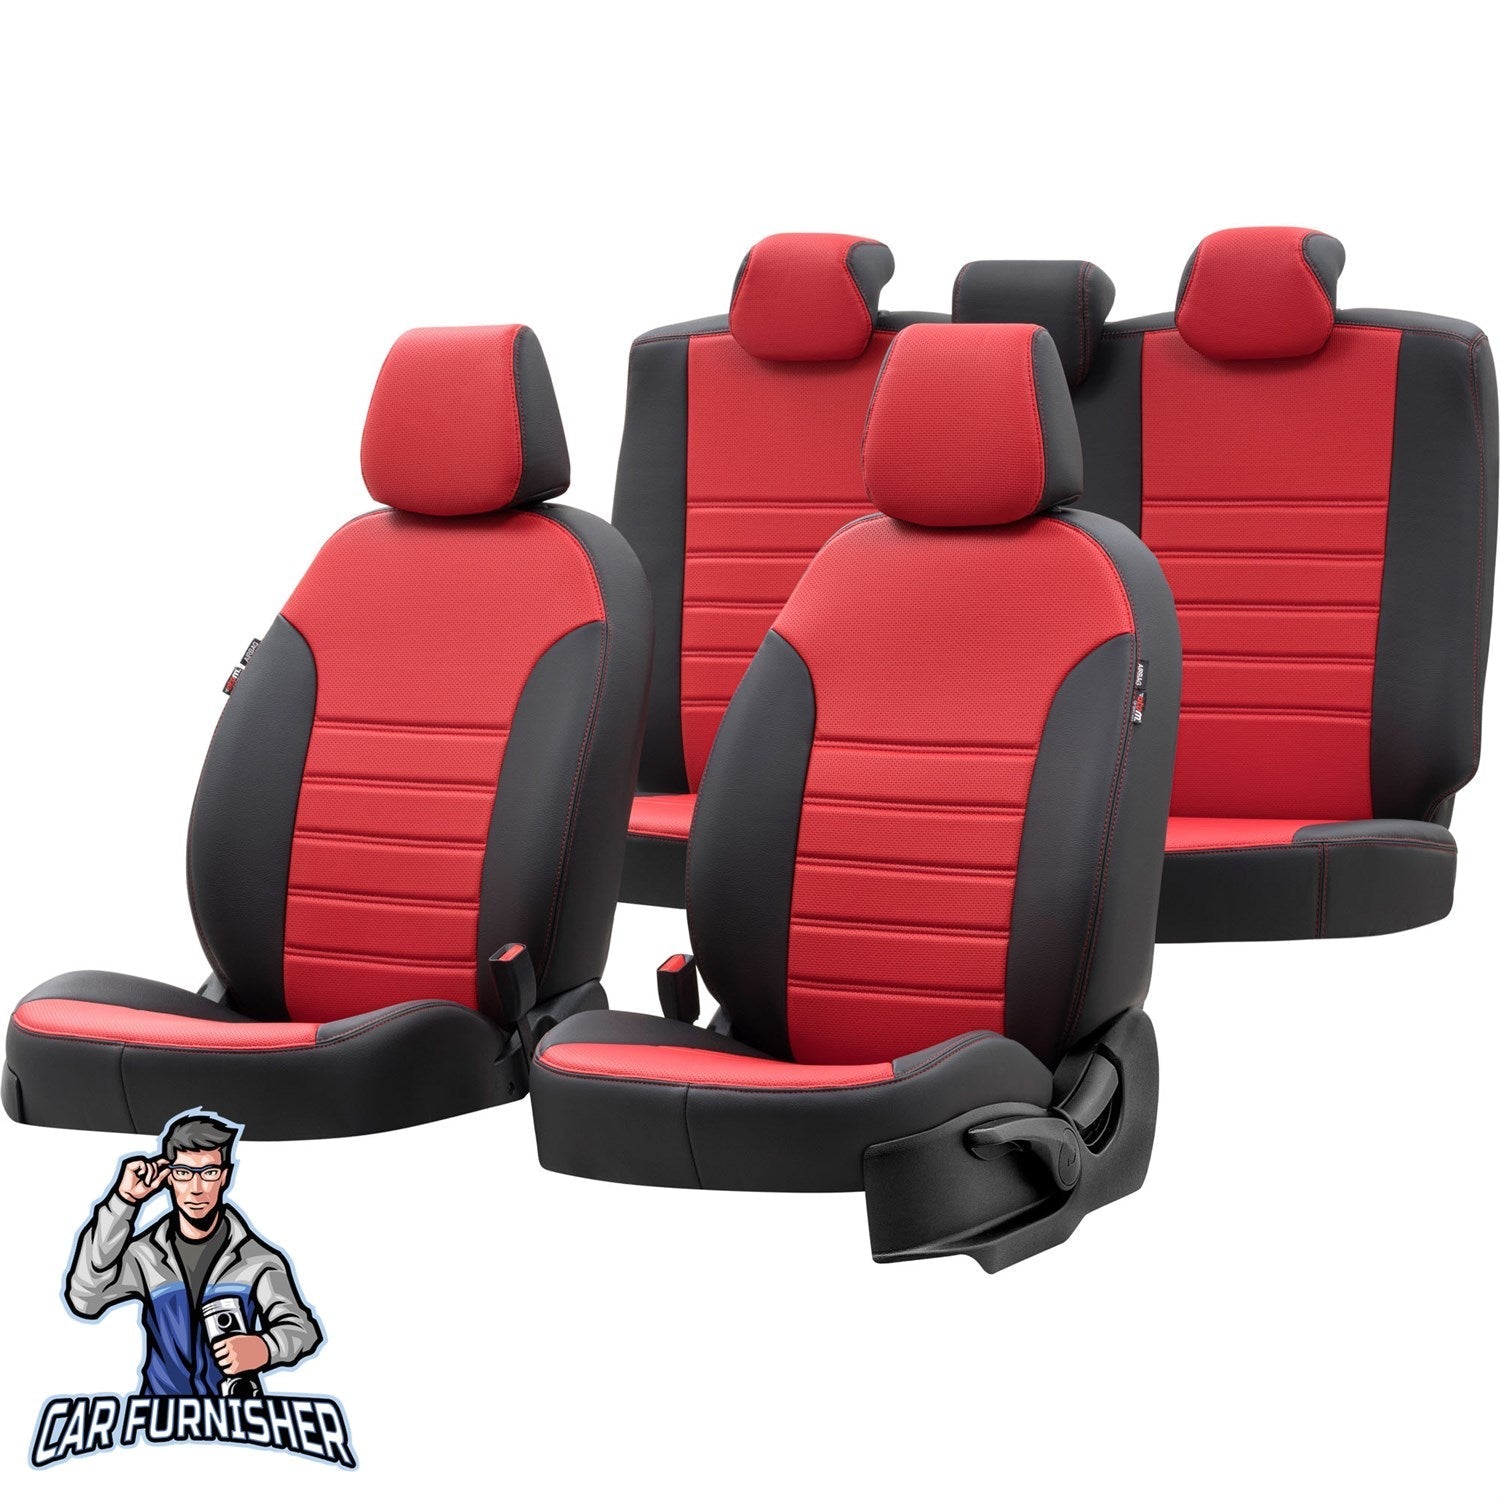 Chevrolet Tahoe Car Seat Covers 2007-2014 GMT/LS/LTZ New York Red Full Set (5 Seats + Handrest) Leather & Fabric